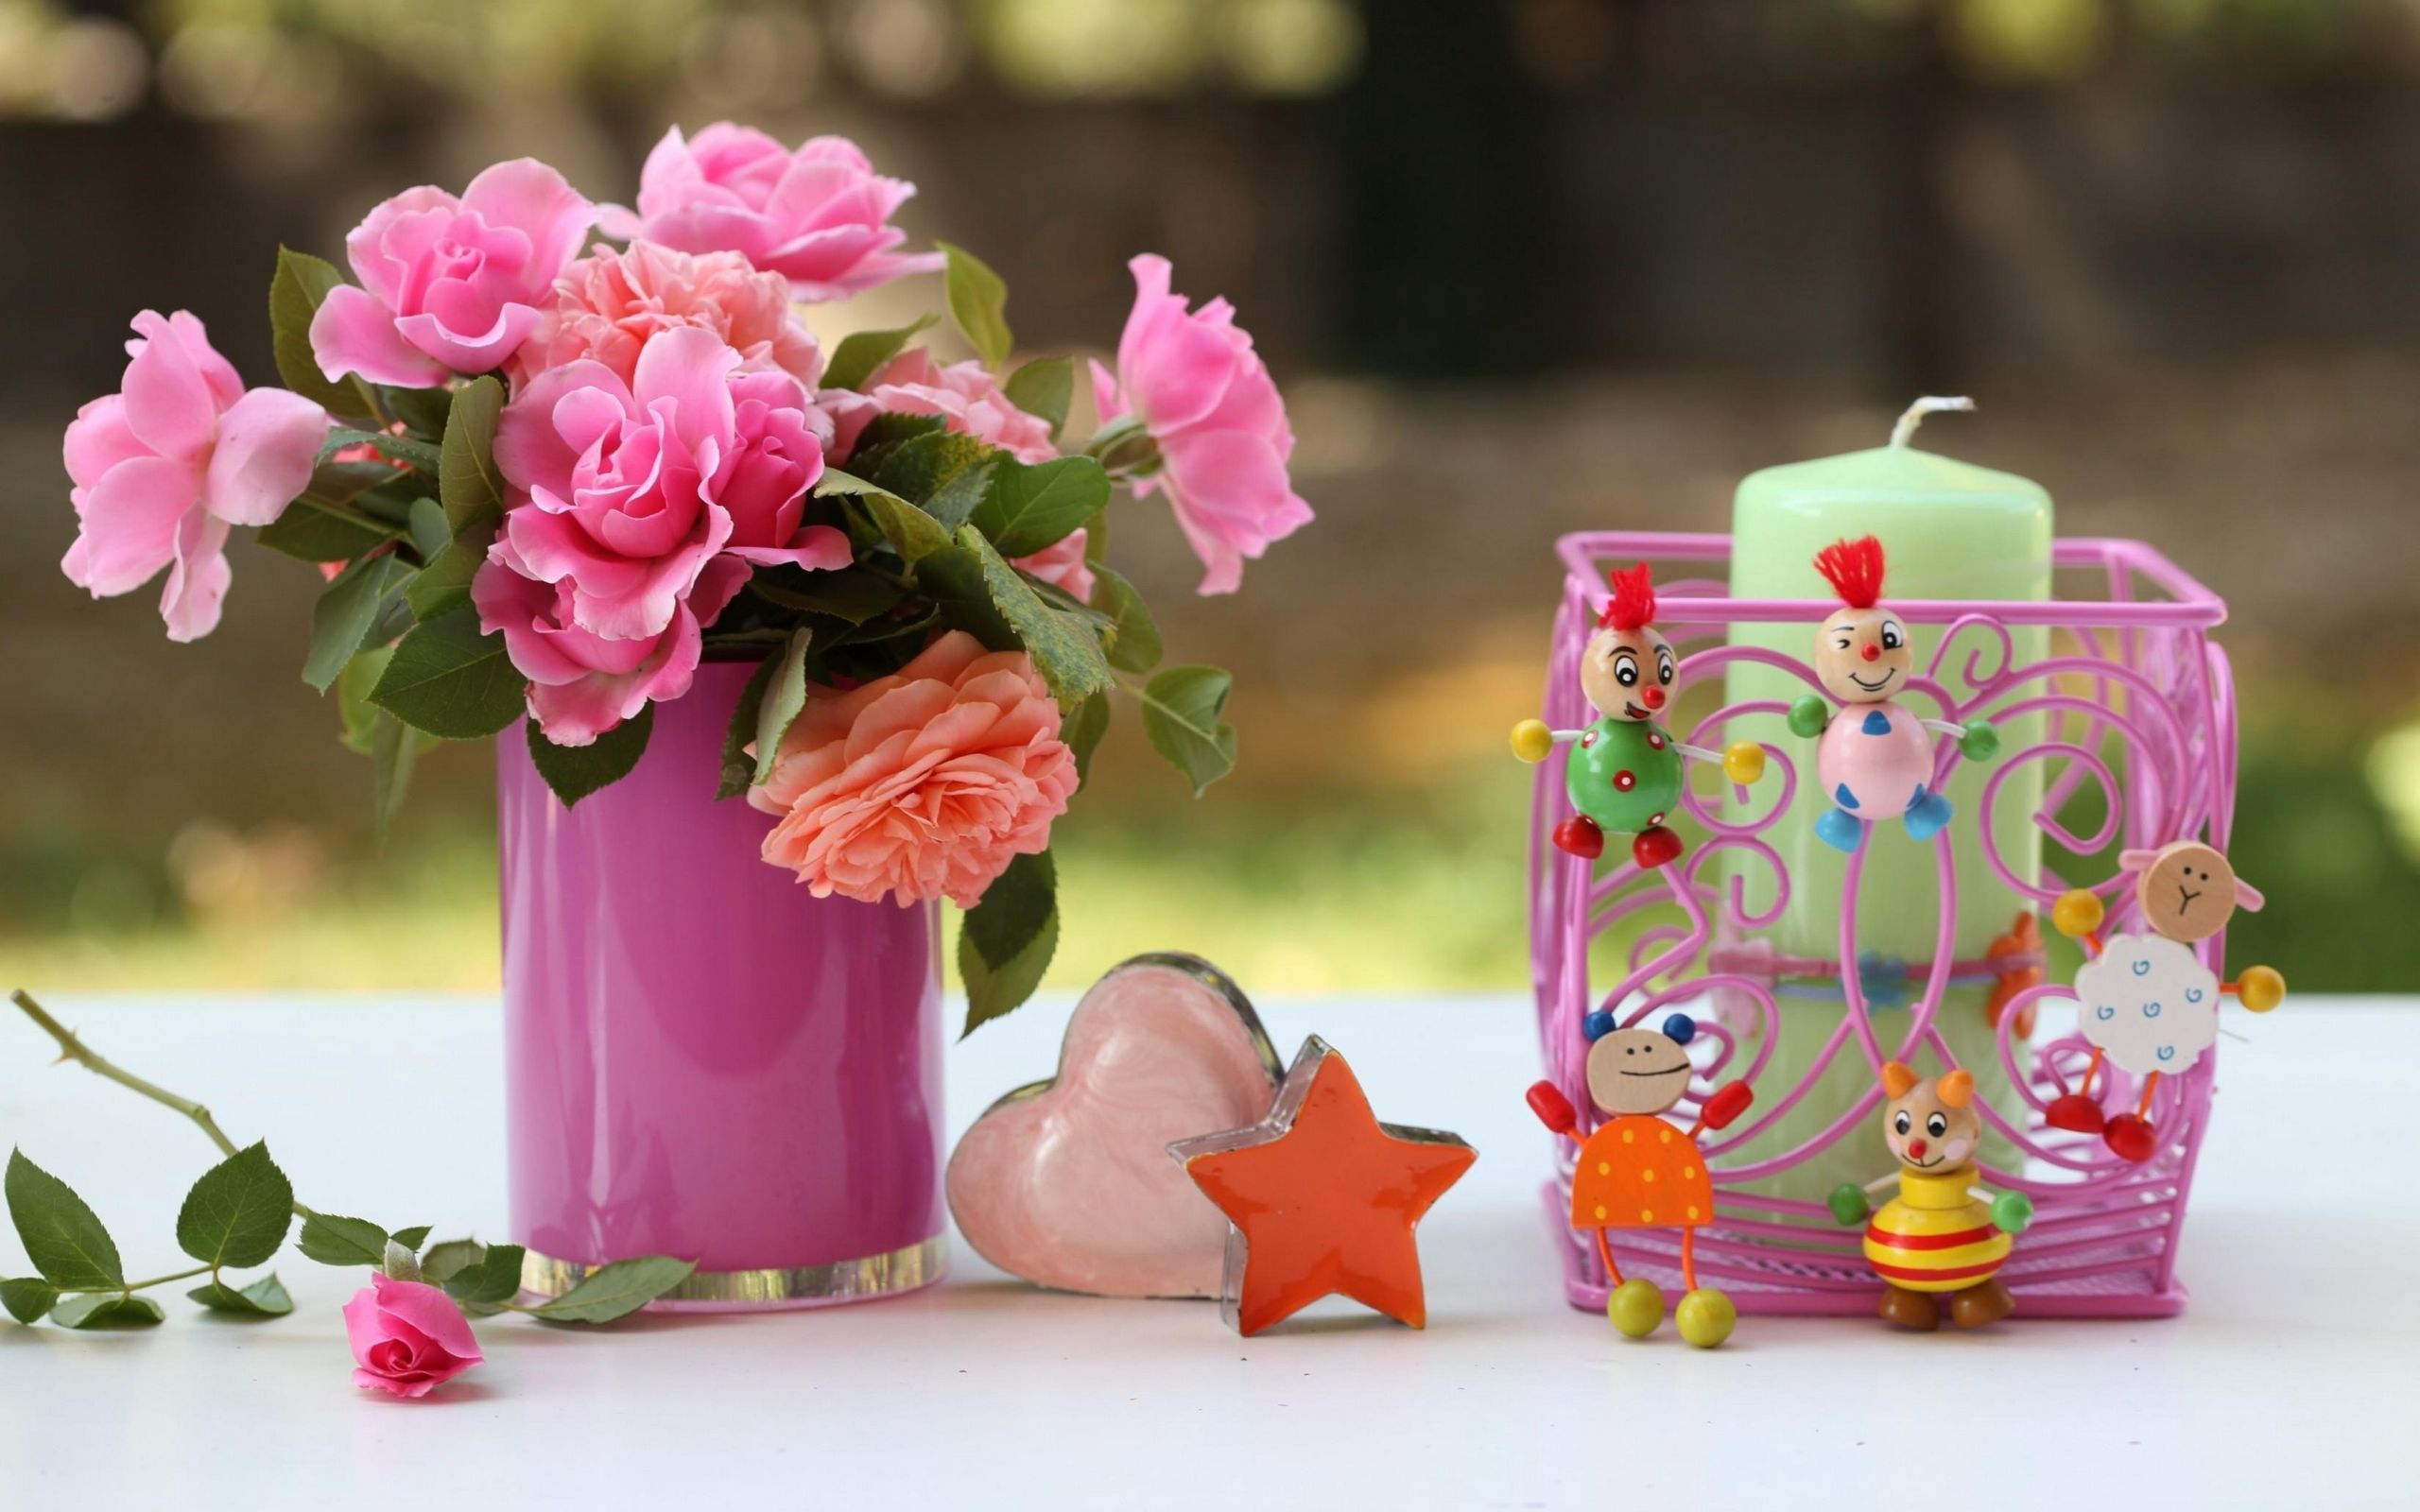 Download wallpaper 2560x1600 vase, flowers, candles, candle holders, toys widescreen 16:10 HD background